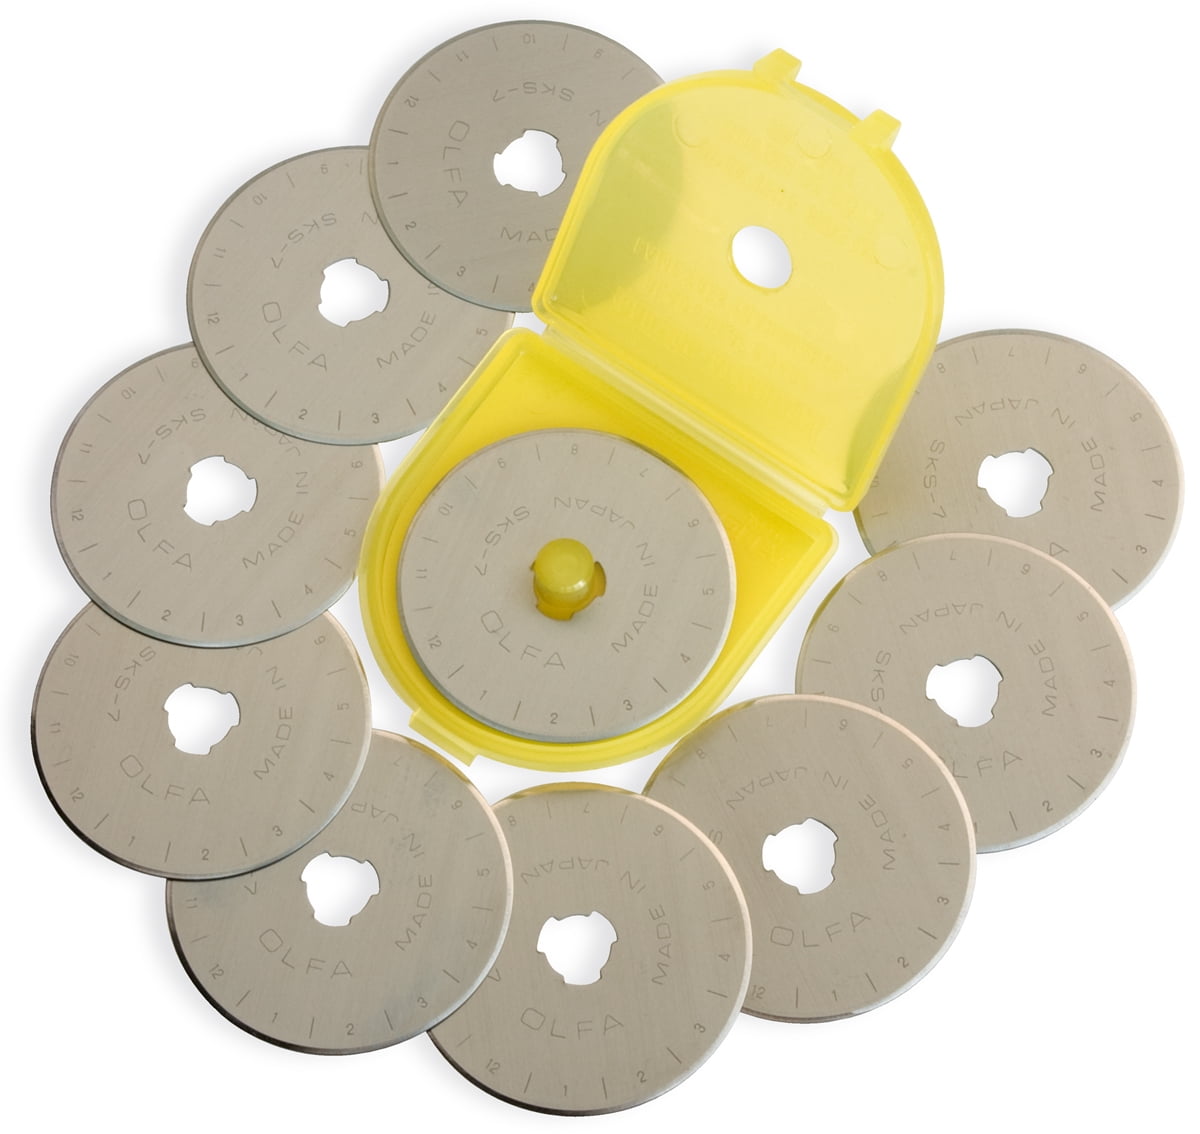 10 x 45mm Rotary Cutter Blades for Olfa Etc SKS-7 Steel by Boodle